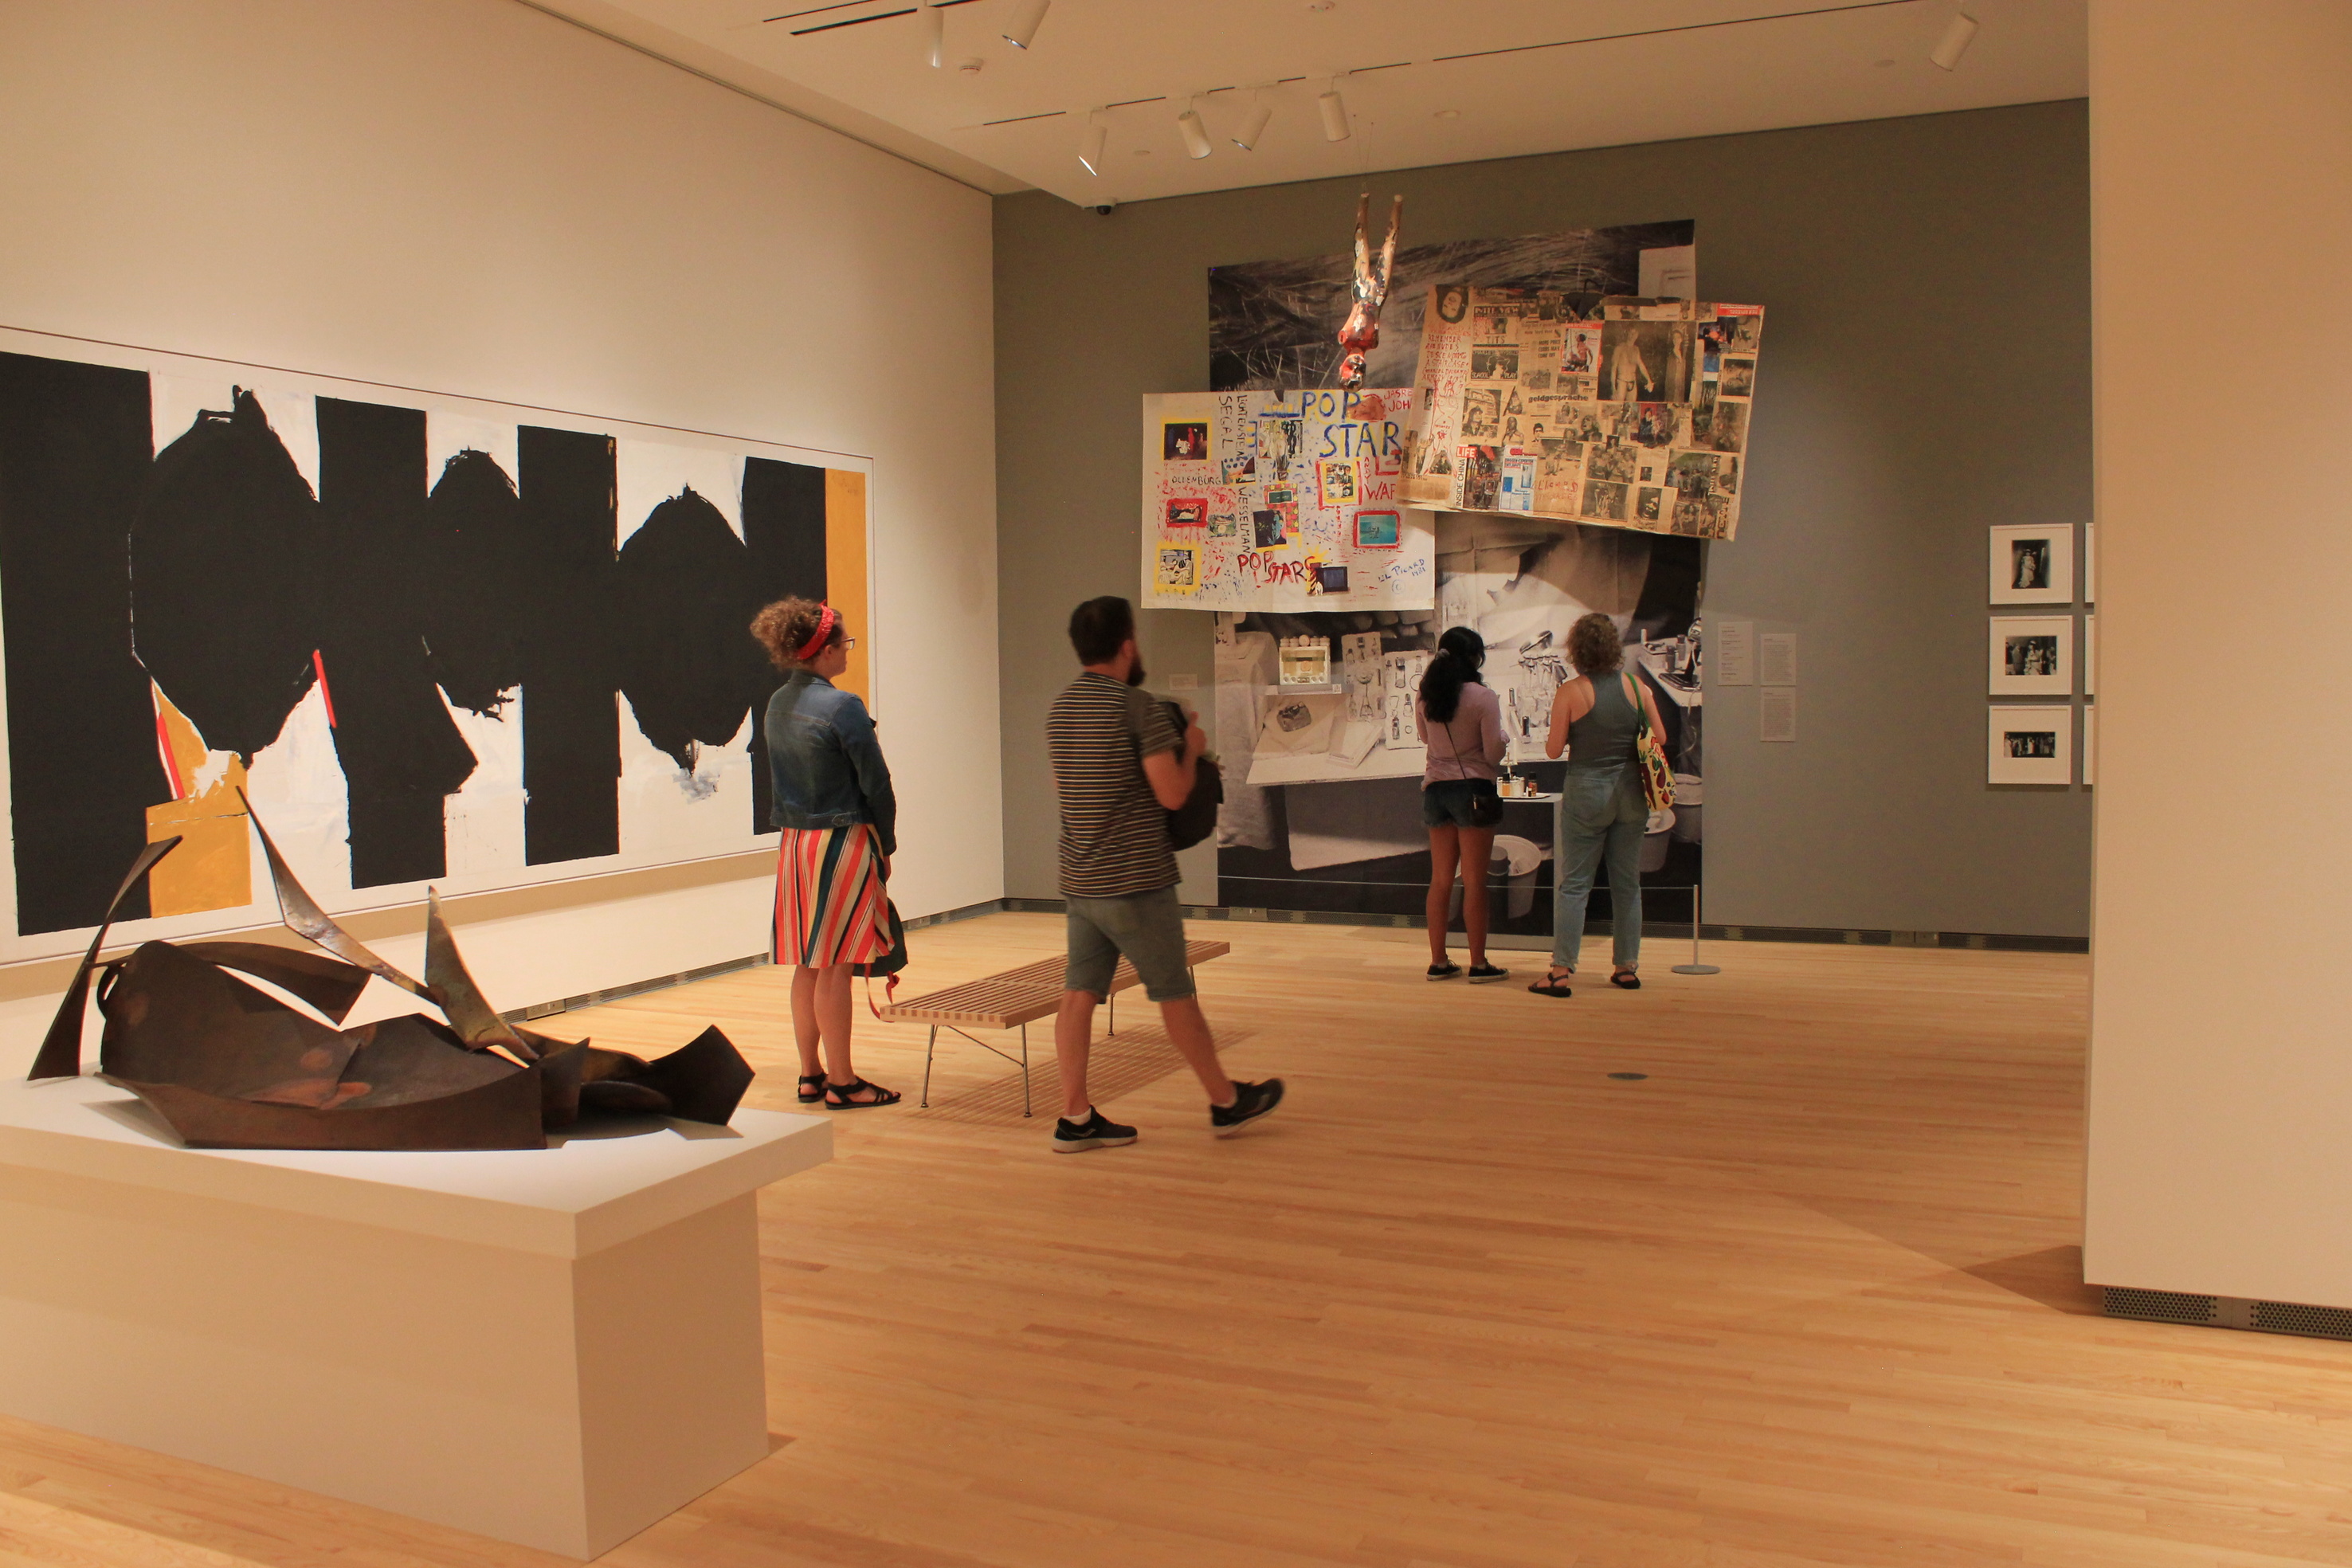 A group of visitors in an art gallery. There is a low-profile sculpture on a table in the foreground, a large, wide painting (with blacks, yellows and white background) on the left and an installation of hanging and standing works in the background